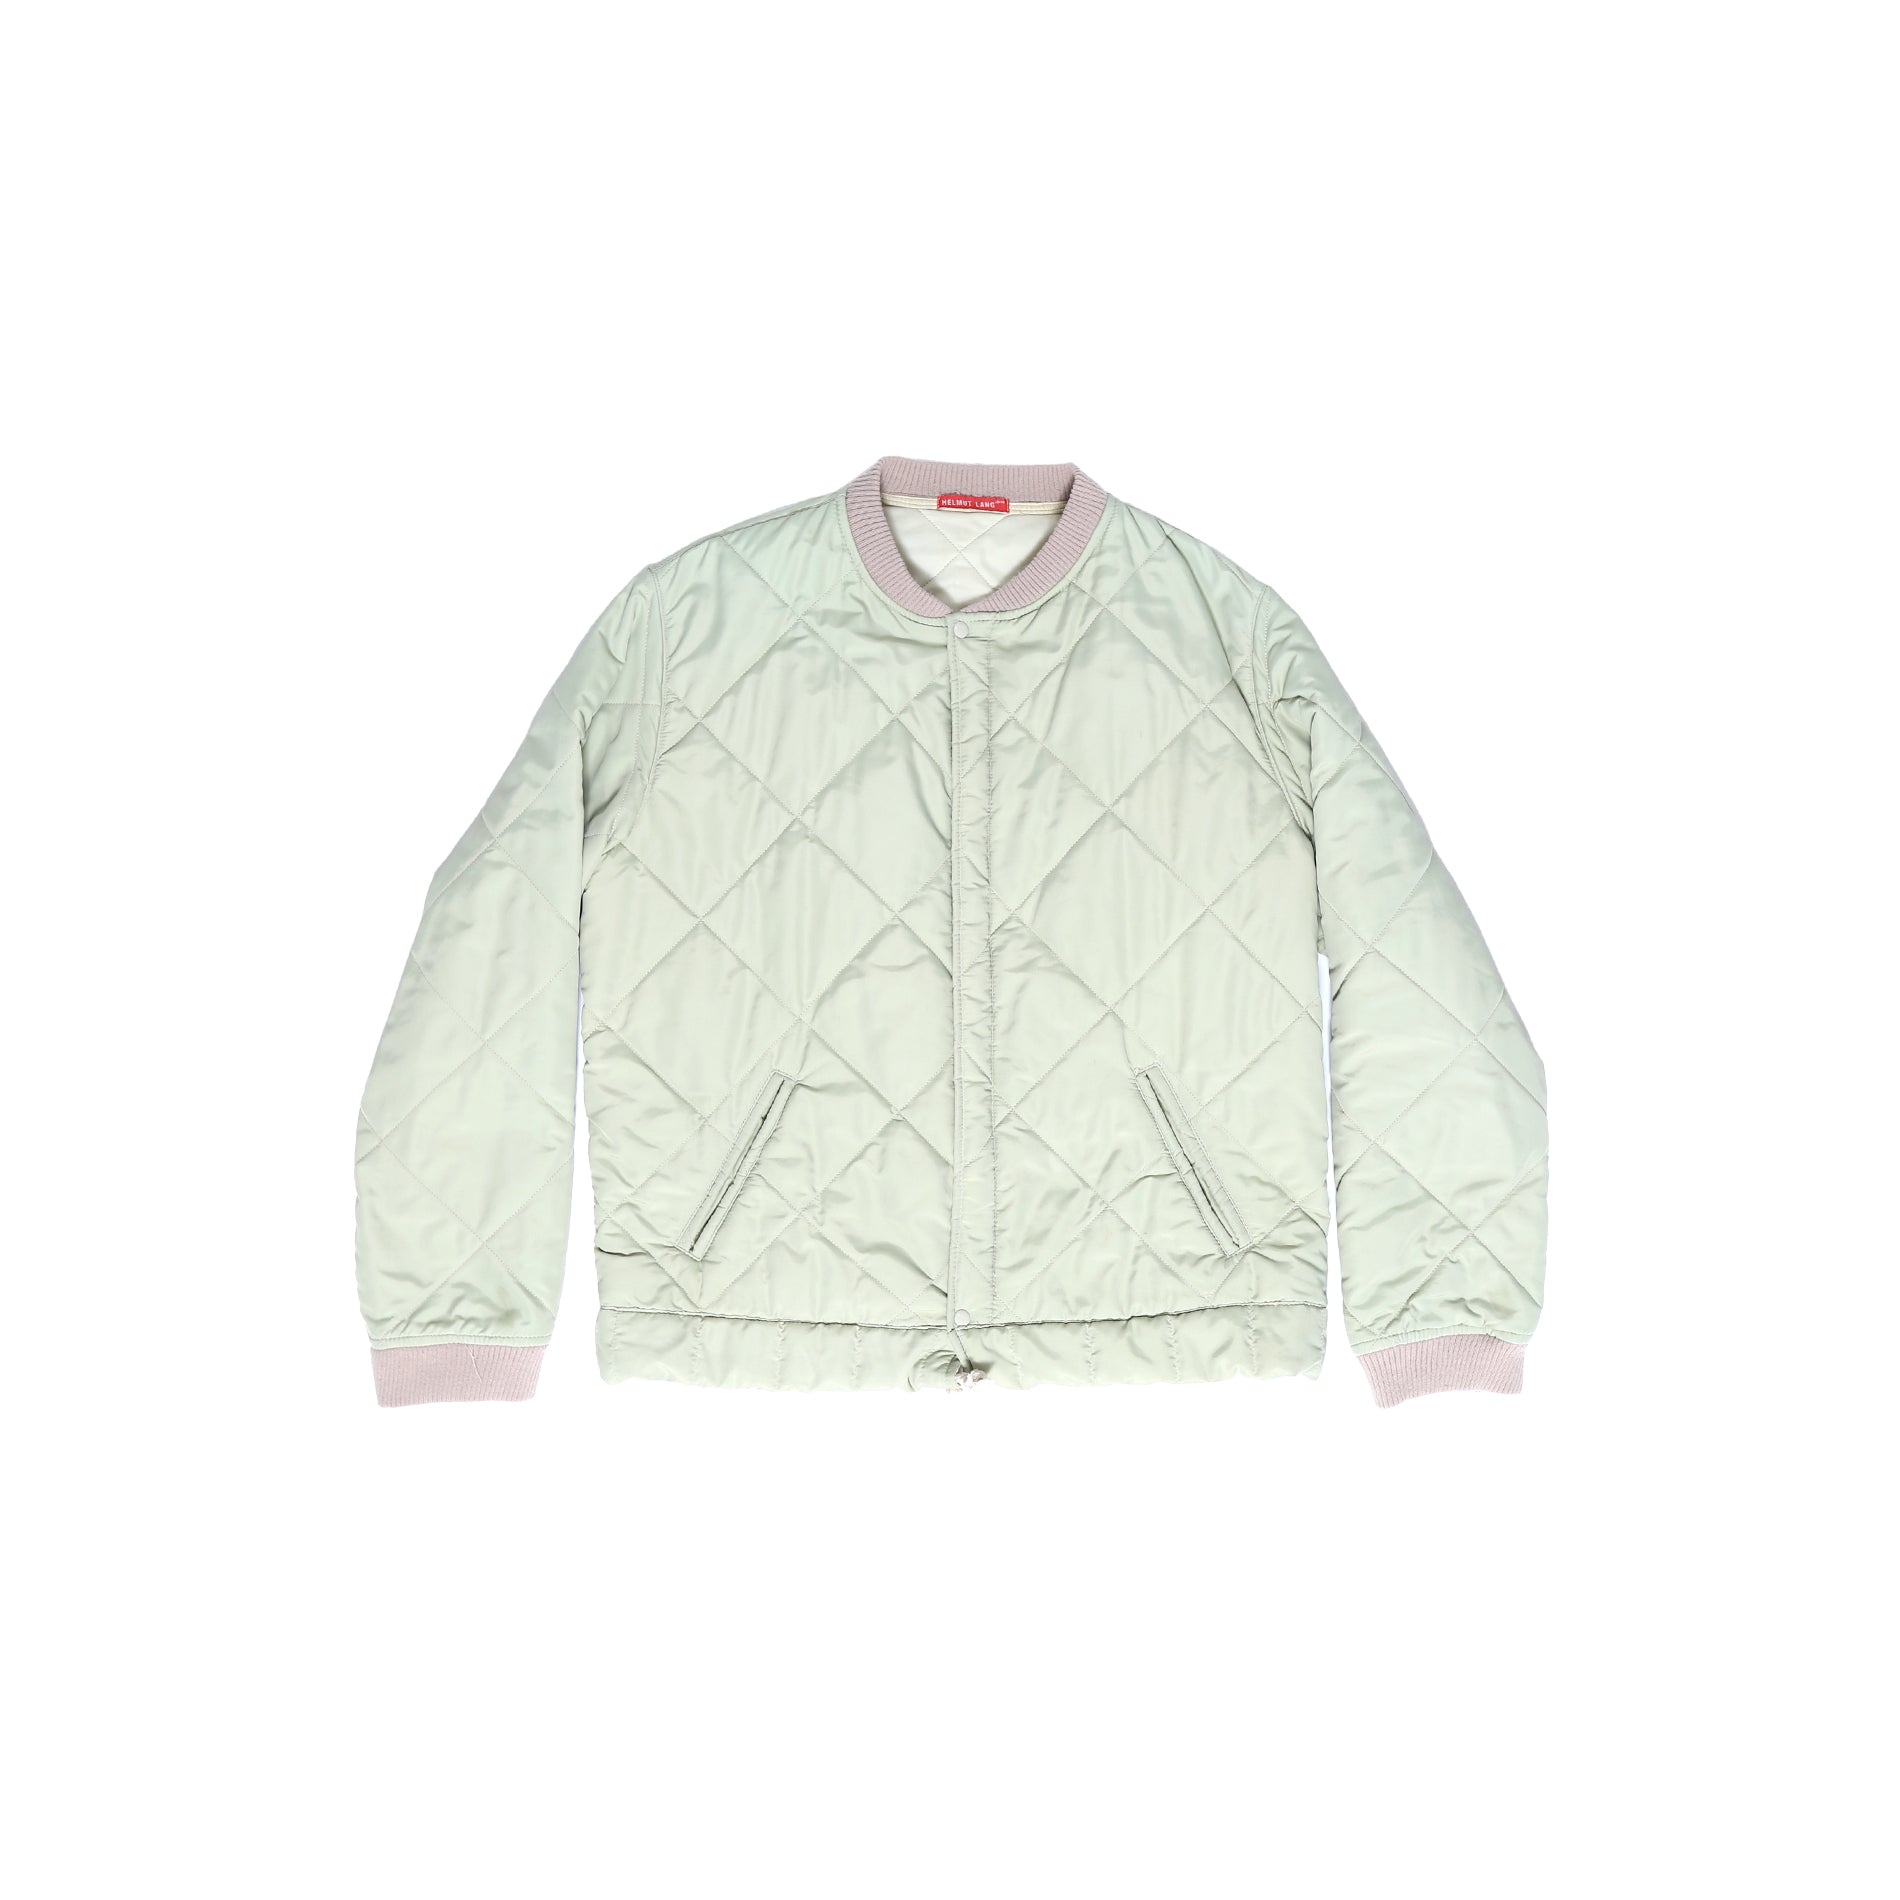 Helmut Lang AW96 Quilted Liner Bomber Jacket